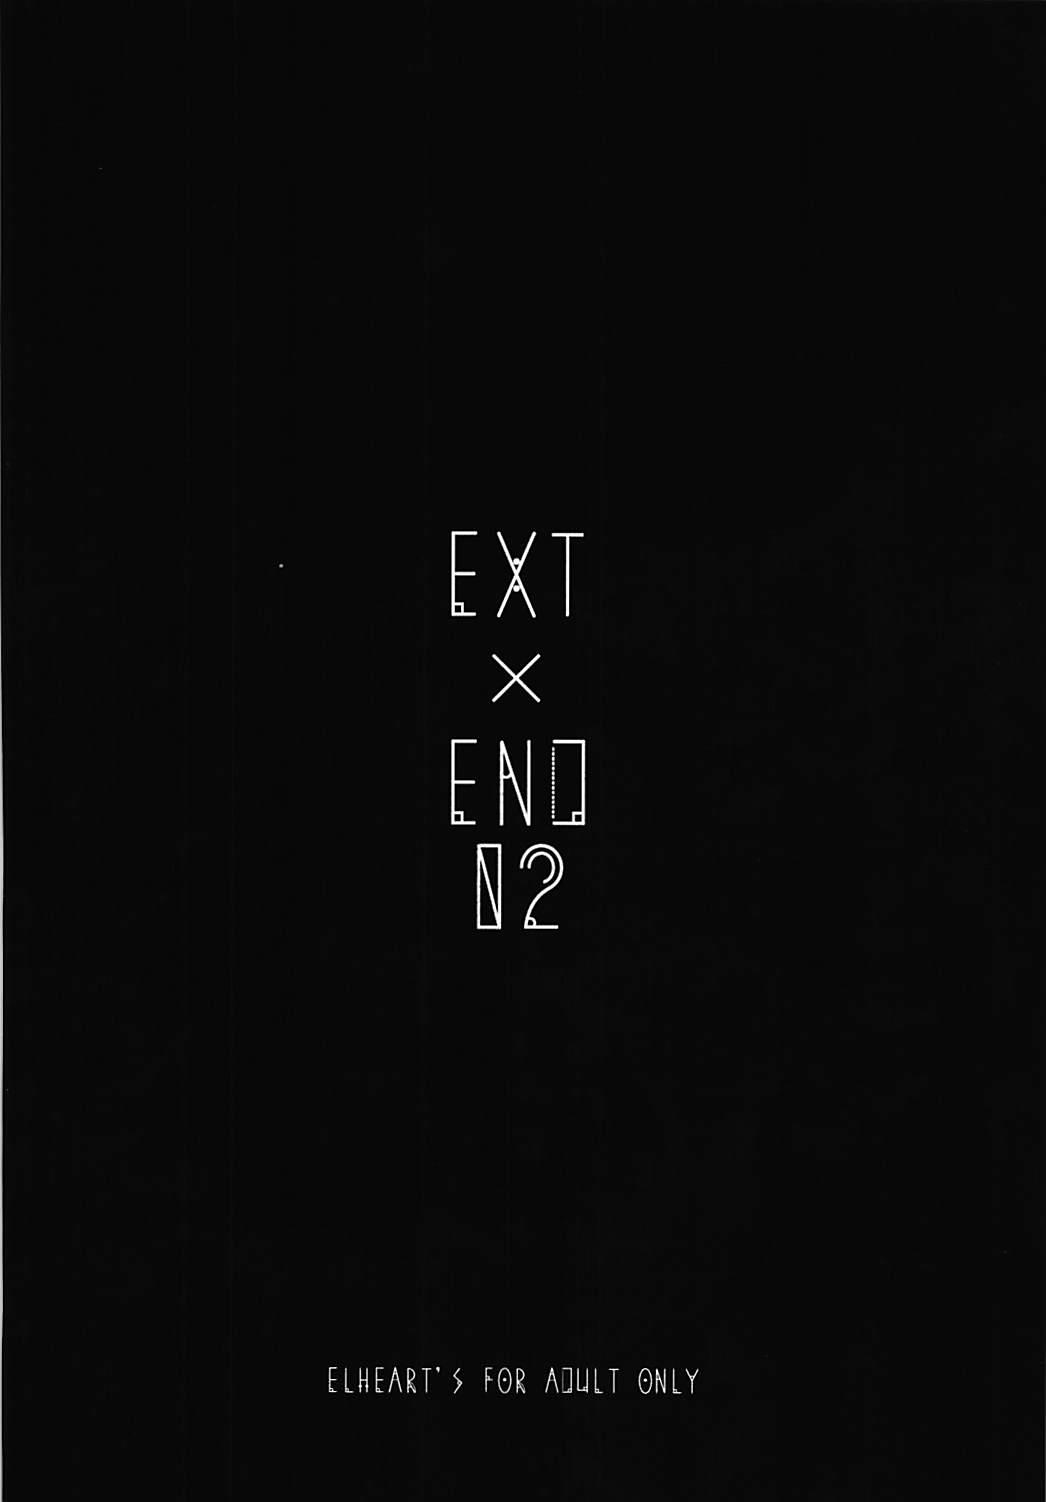 EXT x END 02 25